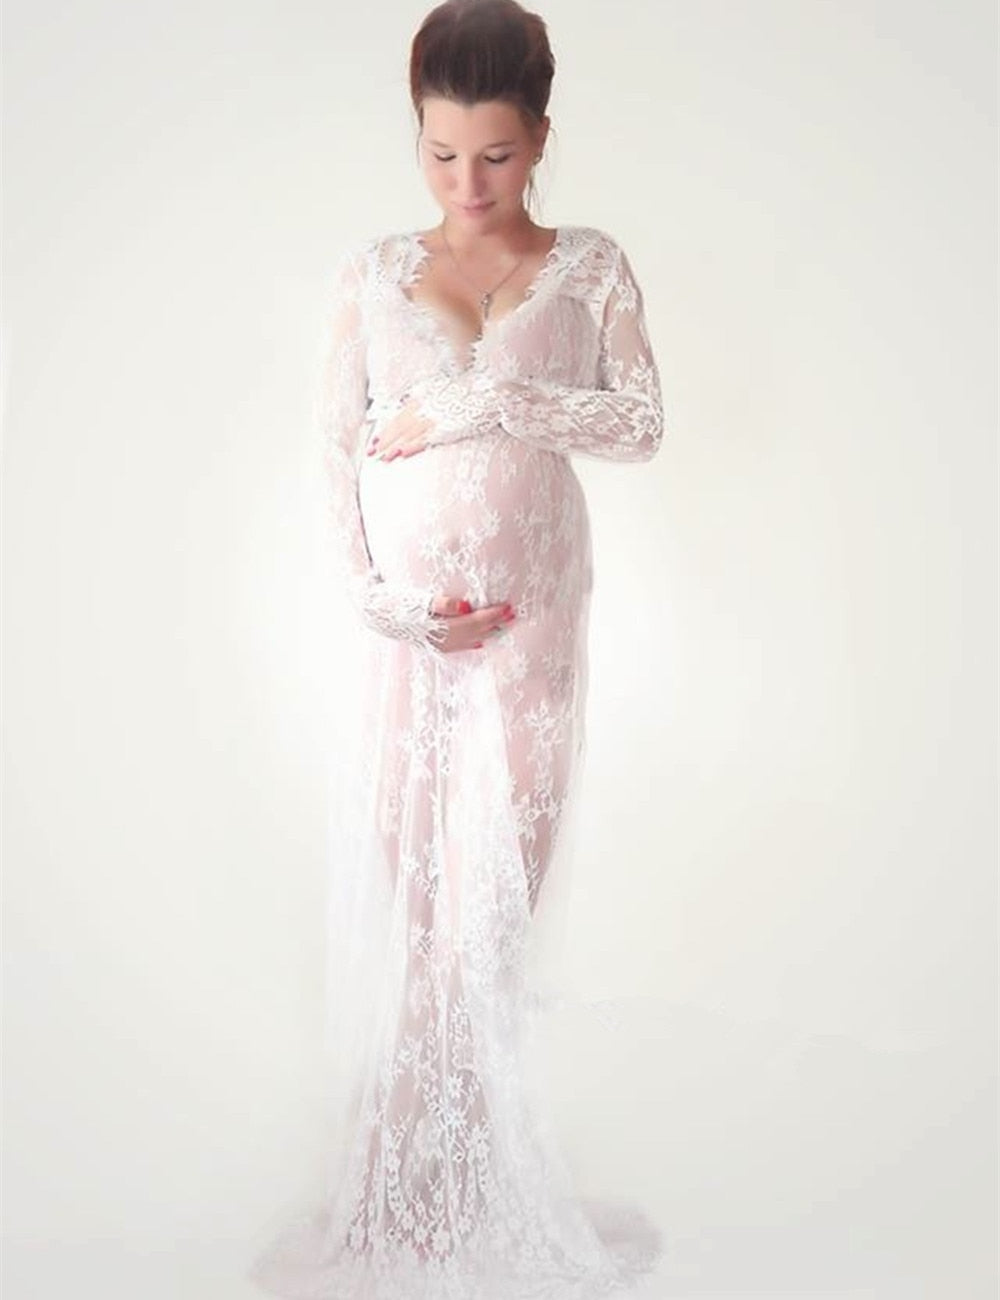 Maternity Gown Lace Dress Fancy Shooting Photo Dress